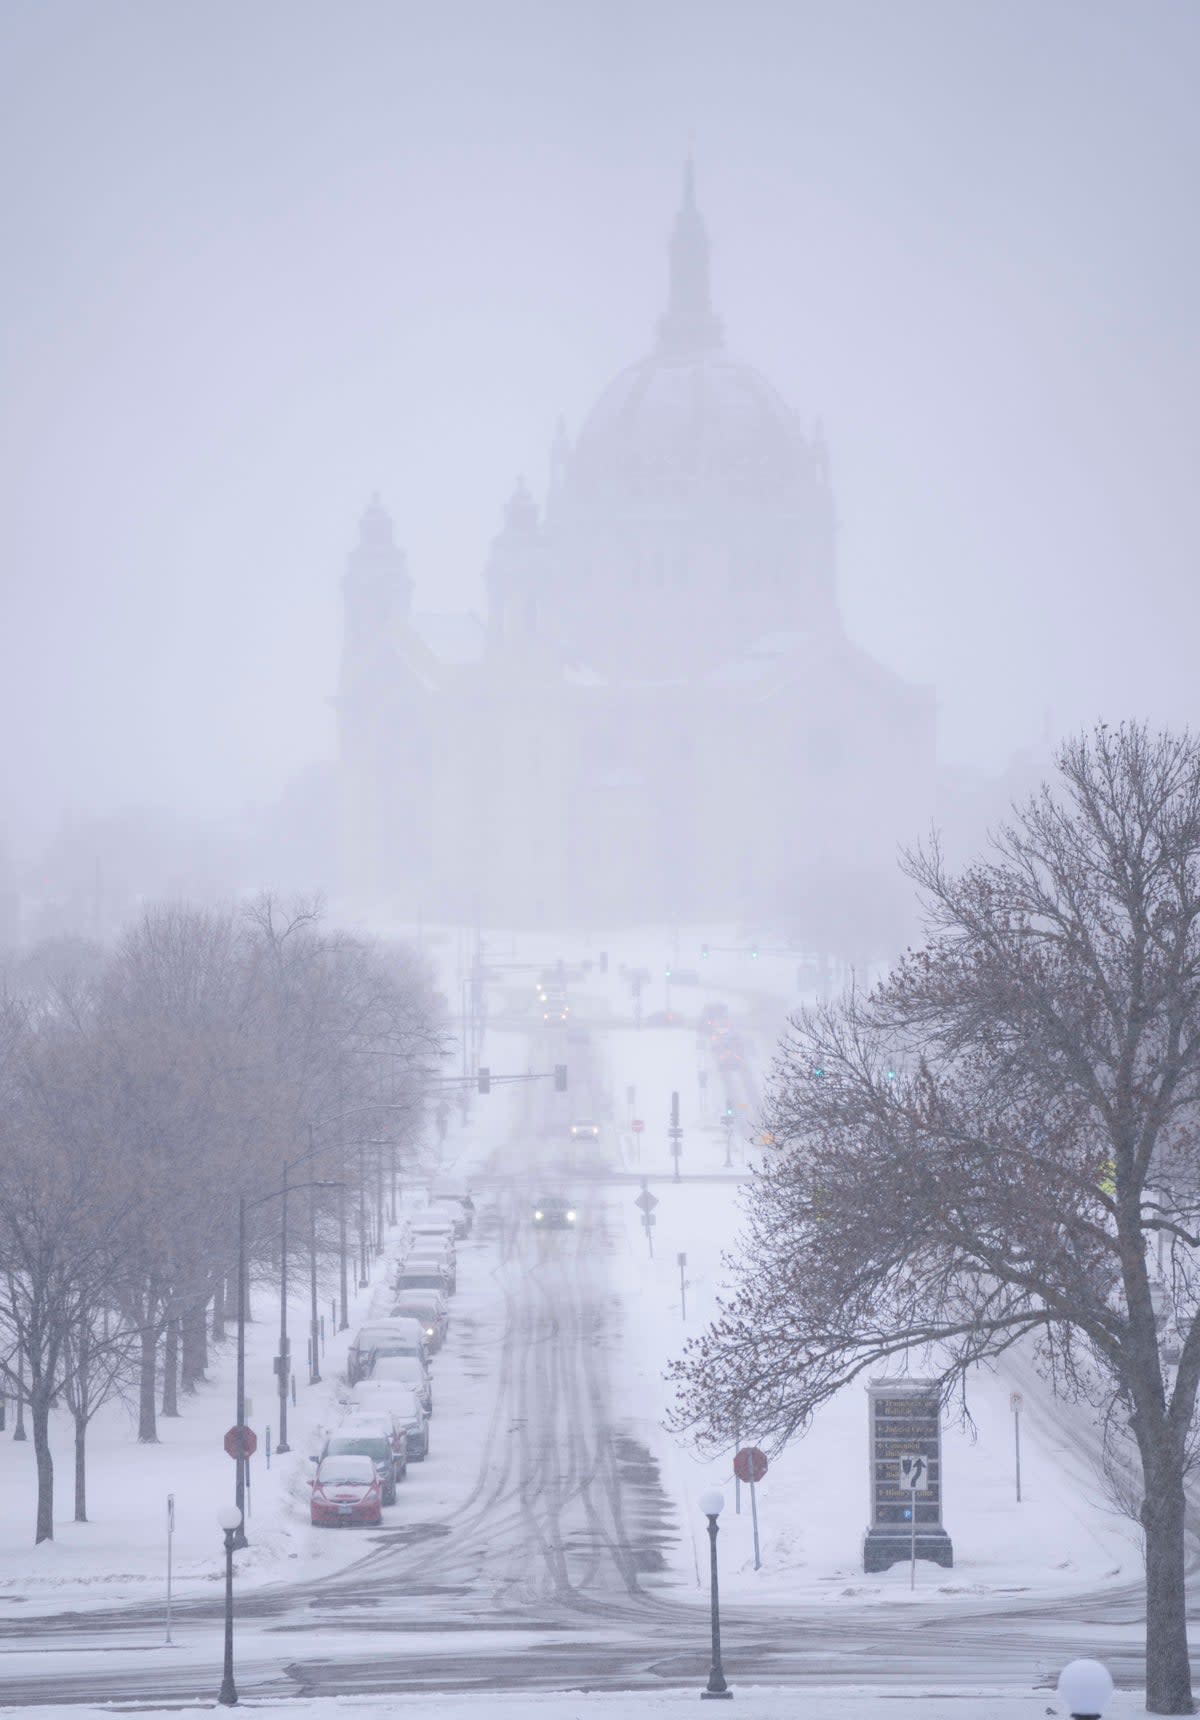 Snow begins to fall around the Cathedral of Saint Paul, on Tuesday, Feb. 21, 2023, at the Minnesota State Capitol in St. Paul, Minn. A monster winter storm took aim at the Upper Midwest on Tuesday, threatening to bring blizzard conditions, bitterly cold temperatures and 2 feet of snow in a three-day onslaught that could affect more than 40 million Americans. (Alex Kormann/Star Tribune via AP) (AP)